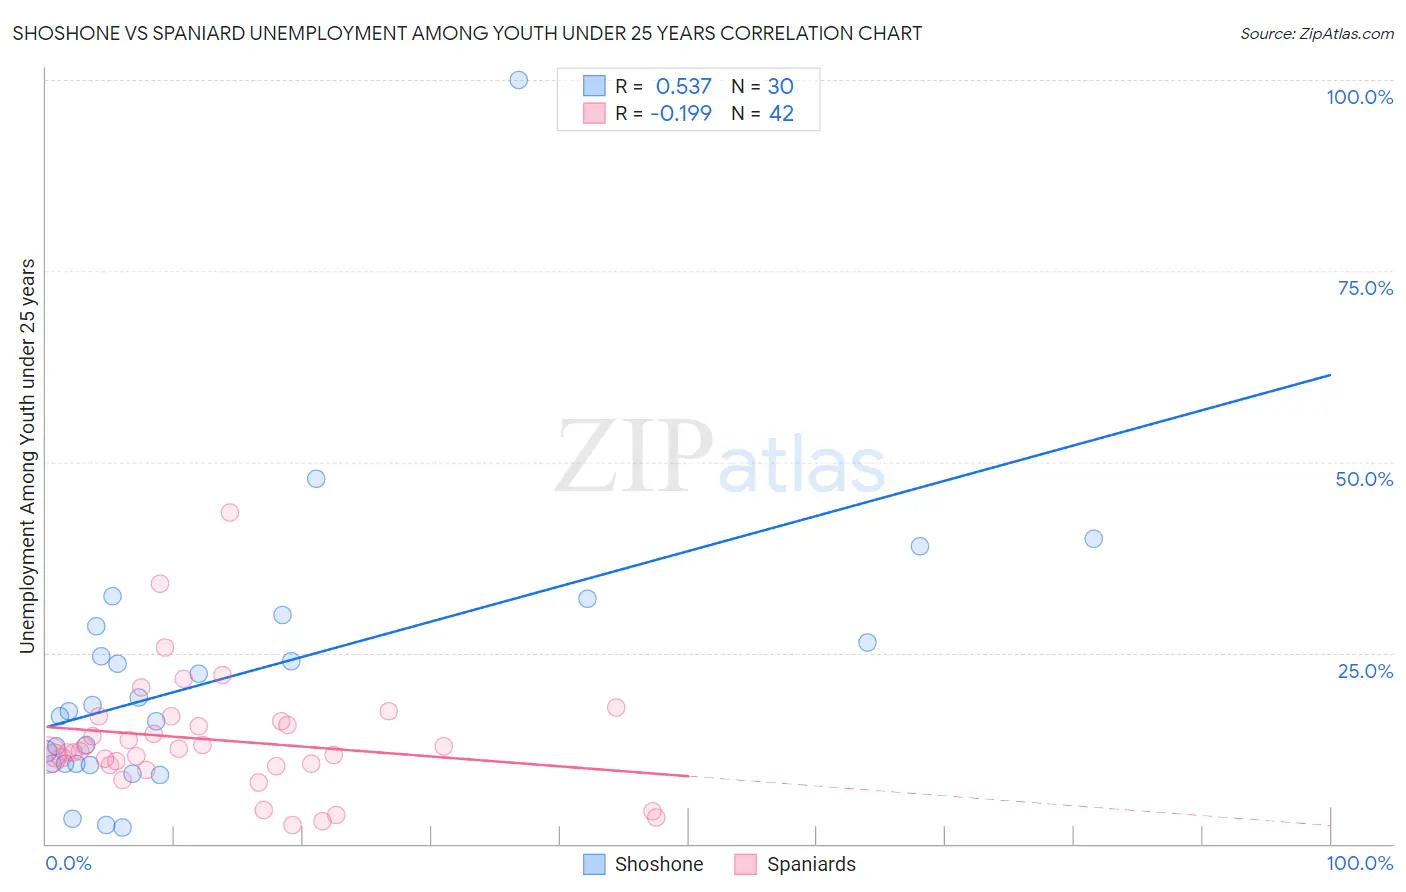 Shoshone vs Spaniard Unemployment Among Youth under 25 years